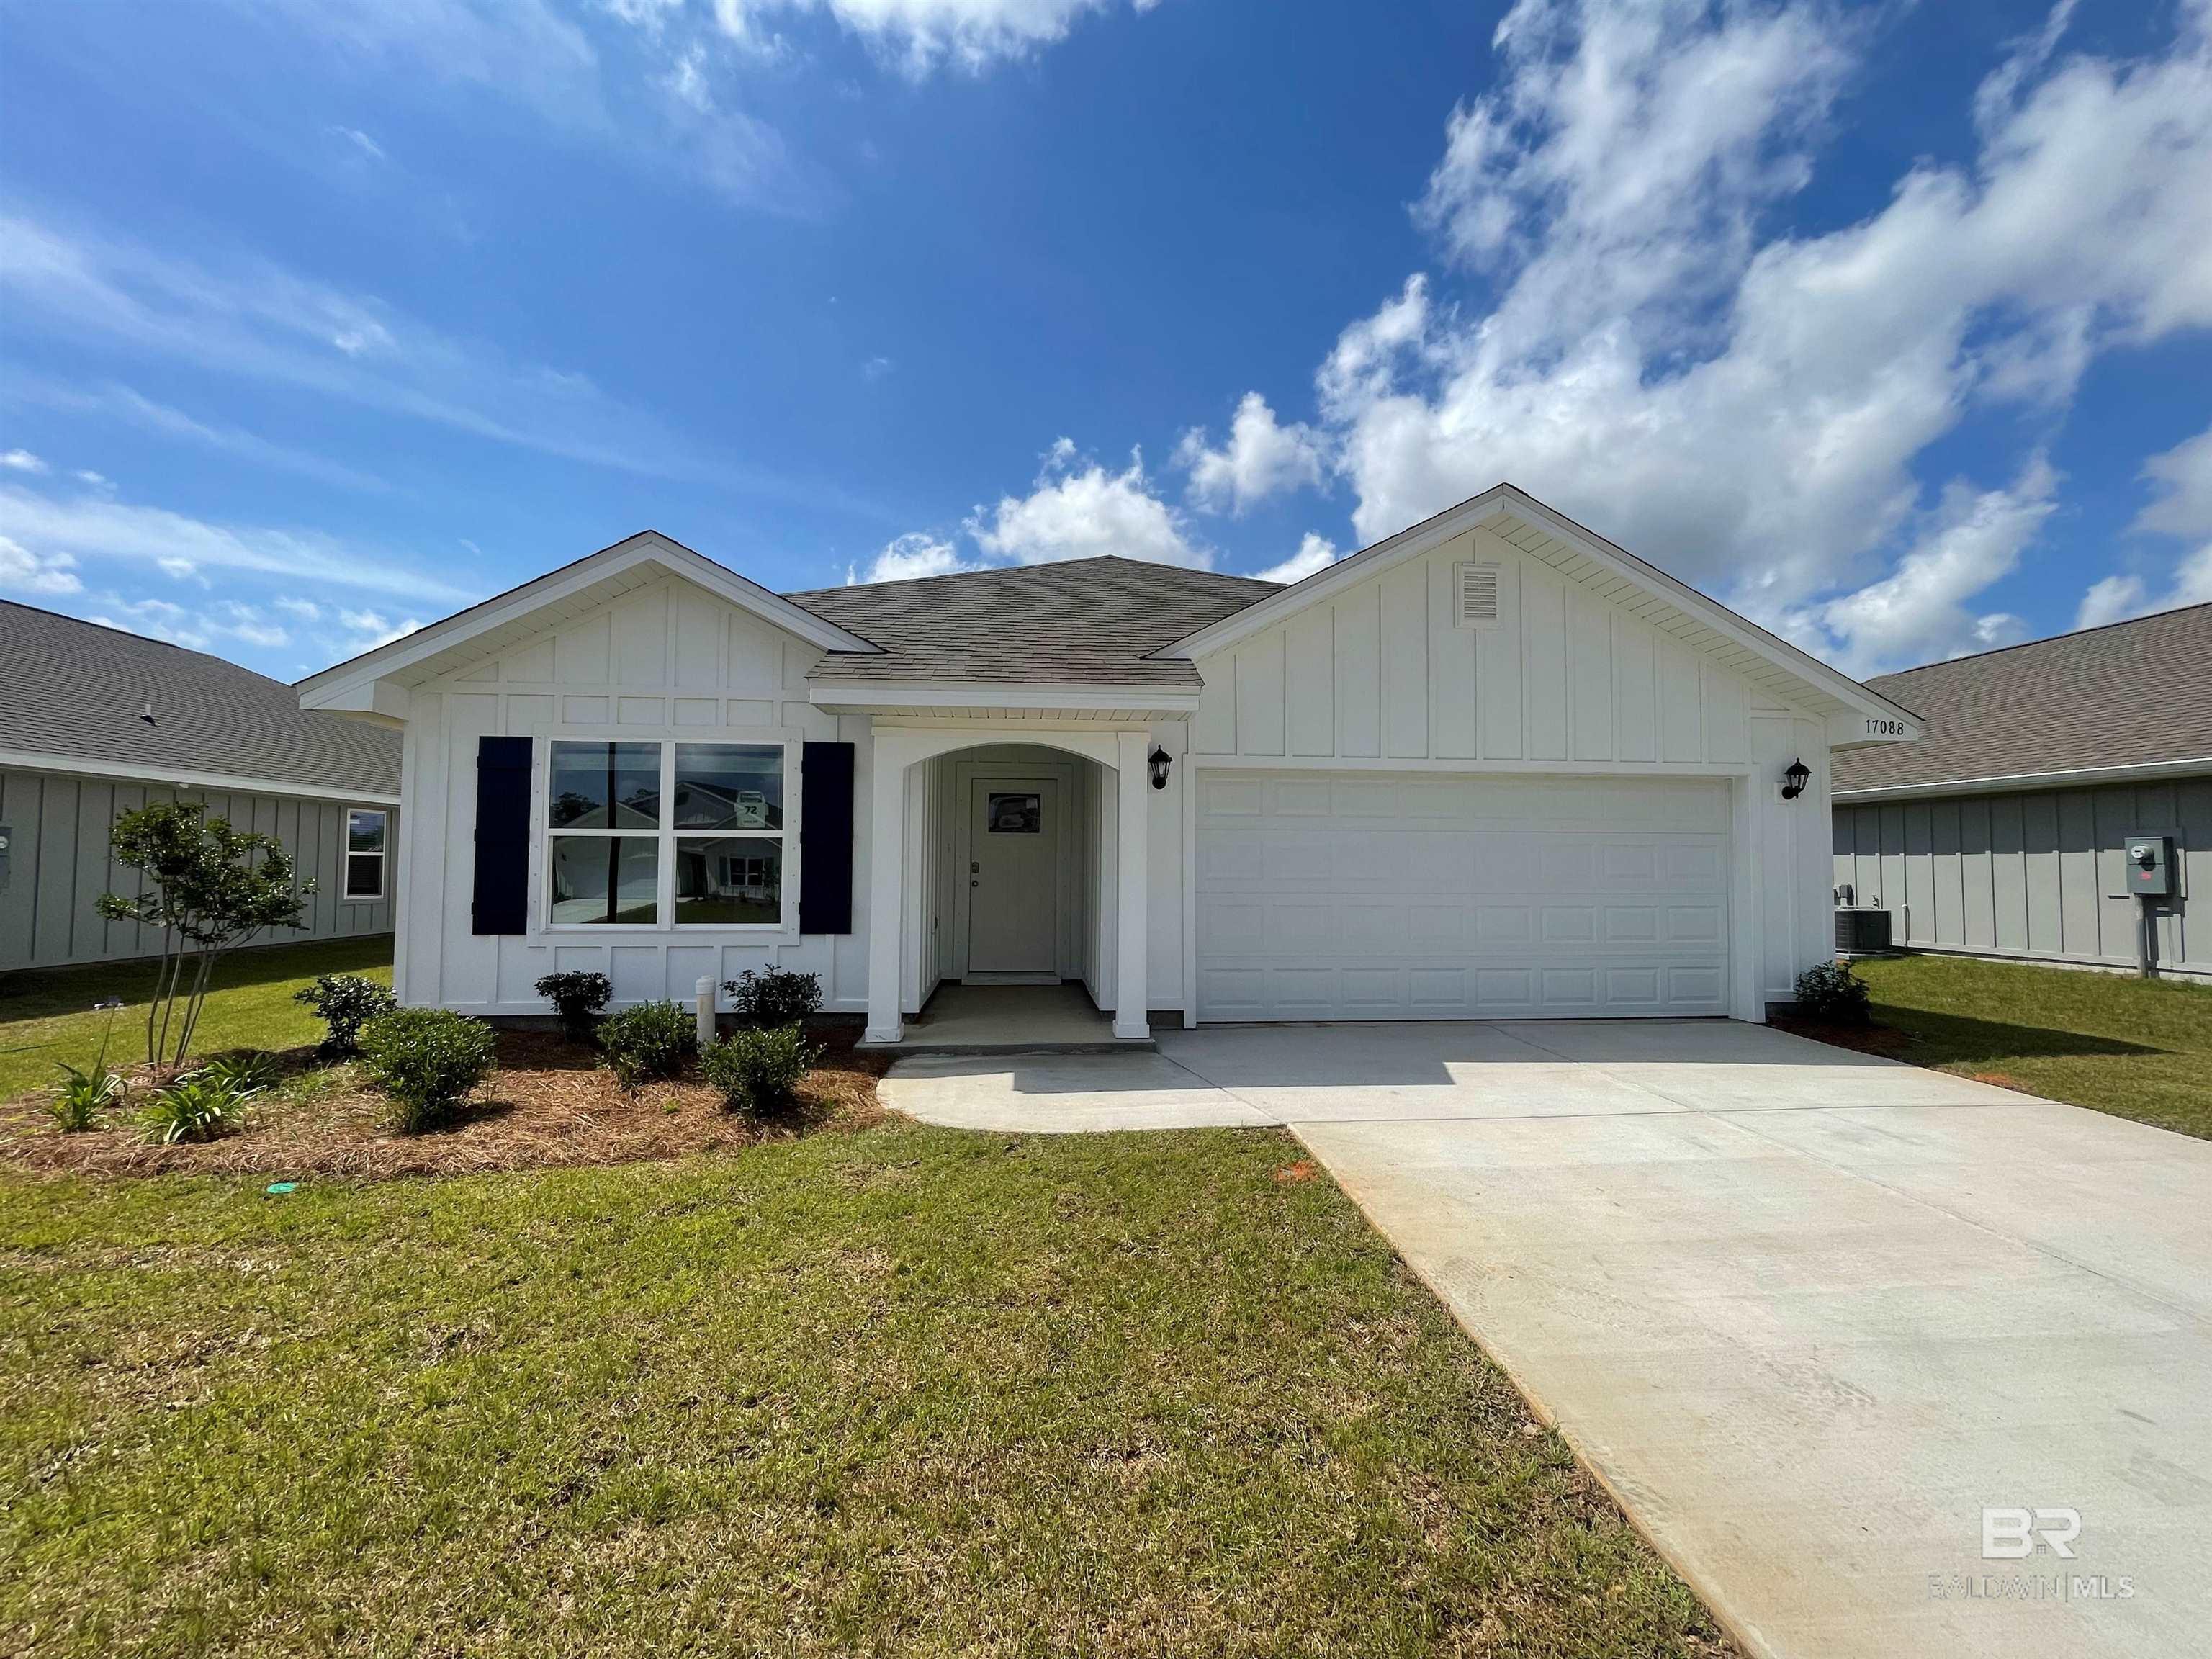 Location, location, location! Ponder is a charming, centrally located community with sidewalks and a playground. It is minutes to shopping, restaurants and the interstate. PLUS, it is only 40 minutes to the sugar sand beaches of the GULF of Mexico. This ARIA, is ready for you to call it home! The foyer leads to a spacious open concept great room and kitchen. It has granite countertops, stainless steel appliances, a large, walk in pantry, and an eat at island bar. The spacious primary suite affords ample space for a king-size bed and has its own ensuite bathroom with granite counters, dual sinks, soaking tub, stand-alone shower and an enormous walk-in closet. The 2 additional bedrooms and bath are split from the primary suite providing plenty of privacy. Brand new and energy efficient, this home comes with thermal doors, Energy Star rated double pane windows, 14SEER Carrier Heat Pump, and the home is connected with Smart Home technology. It is being built to Gold Fortified standards providing potential savings on insurance. It has a 1-year builder's warranty and 10-year structural warranty for additional peace of mind. Plus the builder will contribute up to $3000 towards closing costs, when financing through our preferred lender. Interior pictures are of a similar home and not a representation of the interior colors, options, and finishes of this home.